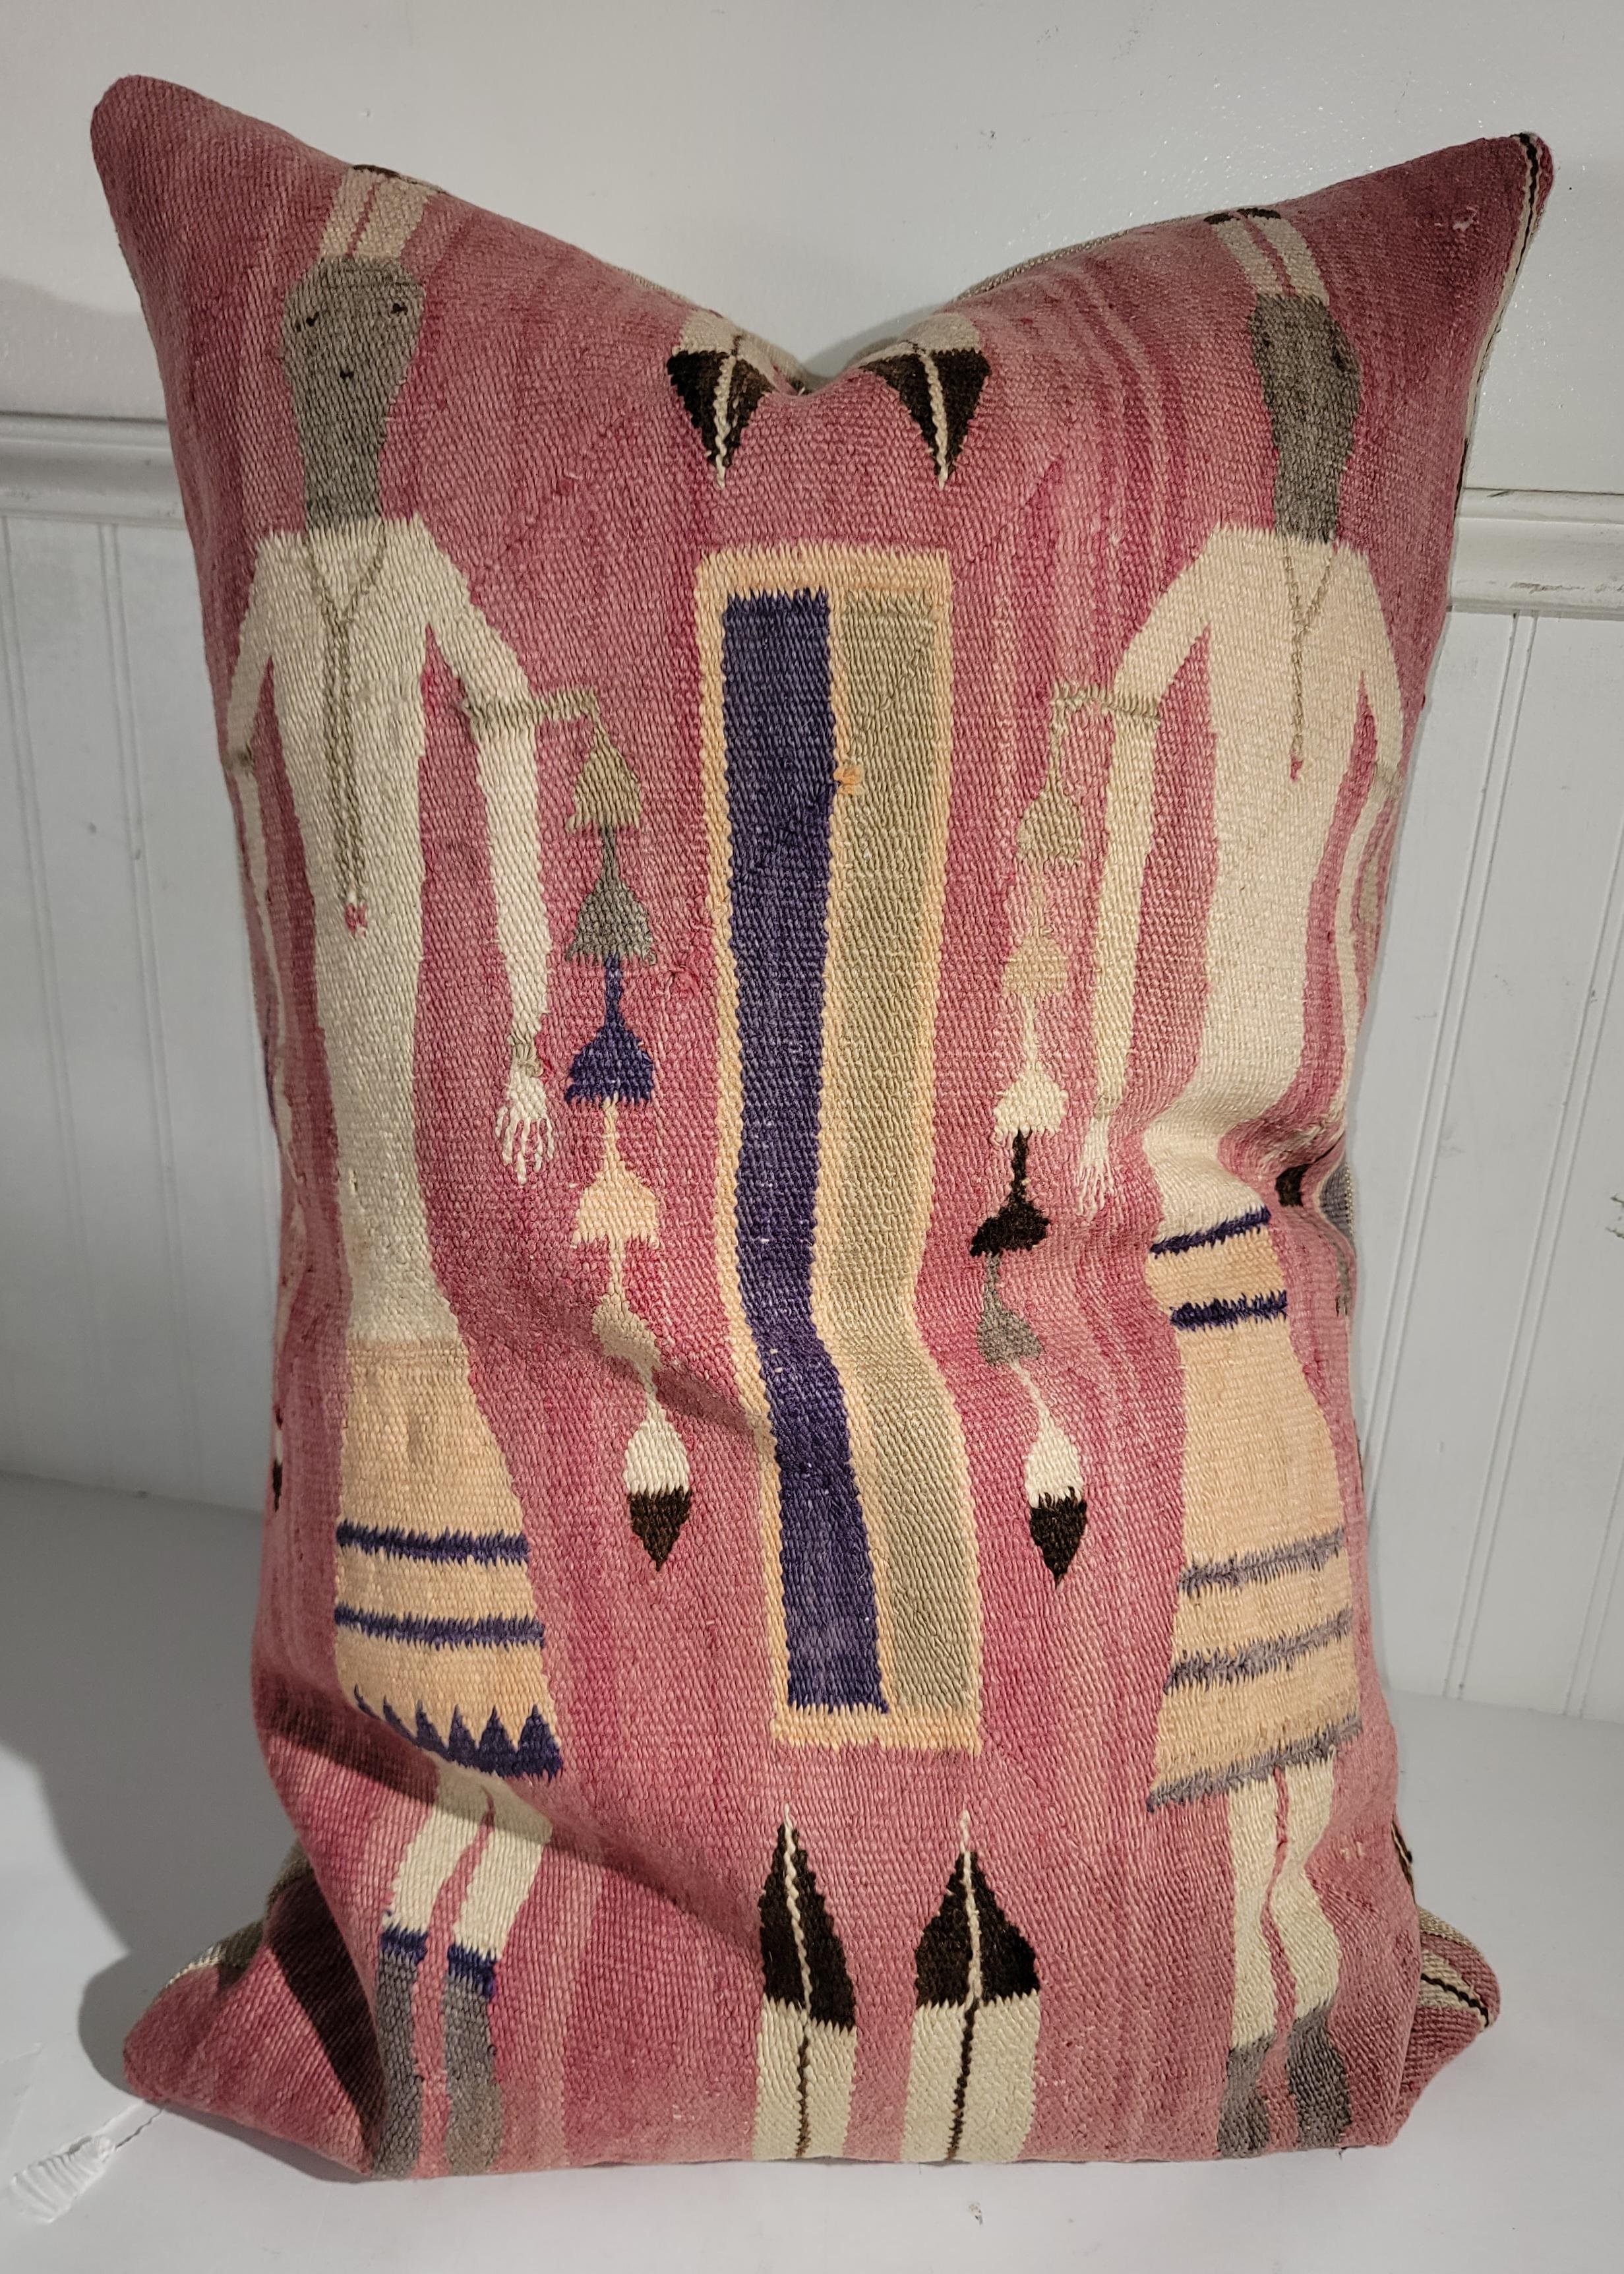 Yea weaving pillows. the the forward facing Deity. This par of pillows show a wonderful colorful pallet and pattern. The Forward facing Yei is the deity that brings super natural powers to healers for patients and usually shown with a corn stalk,